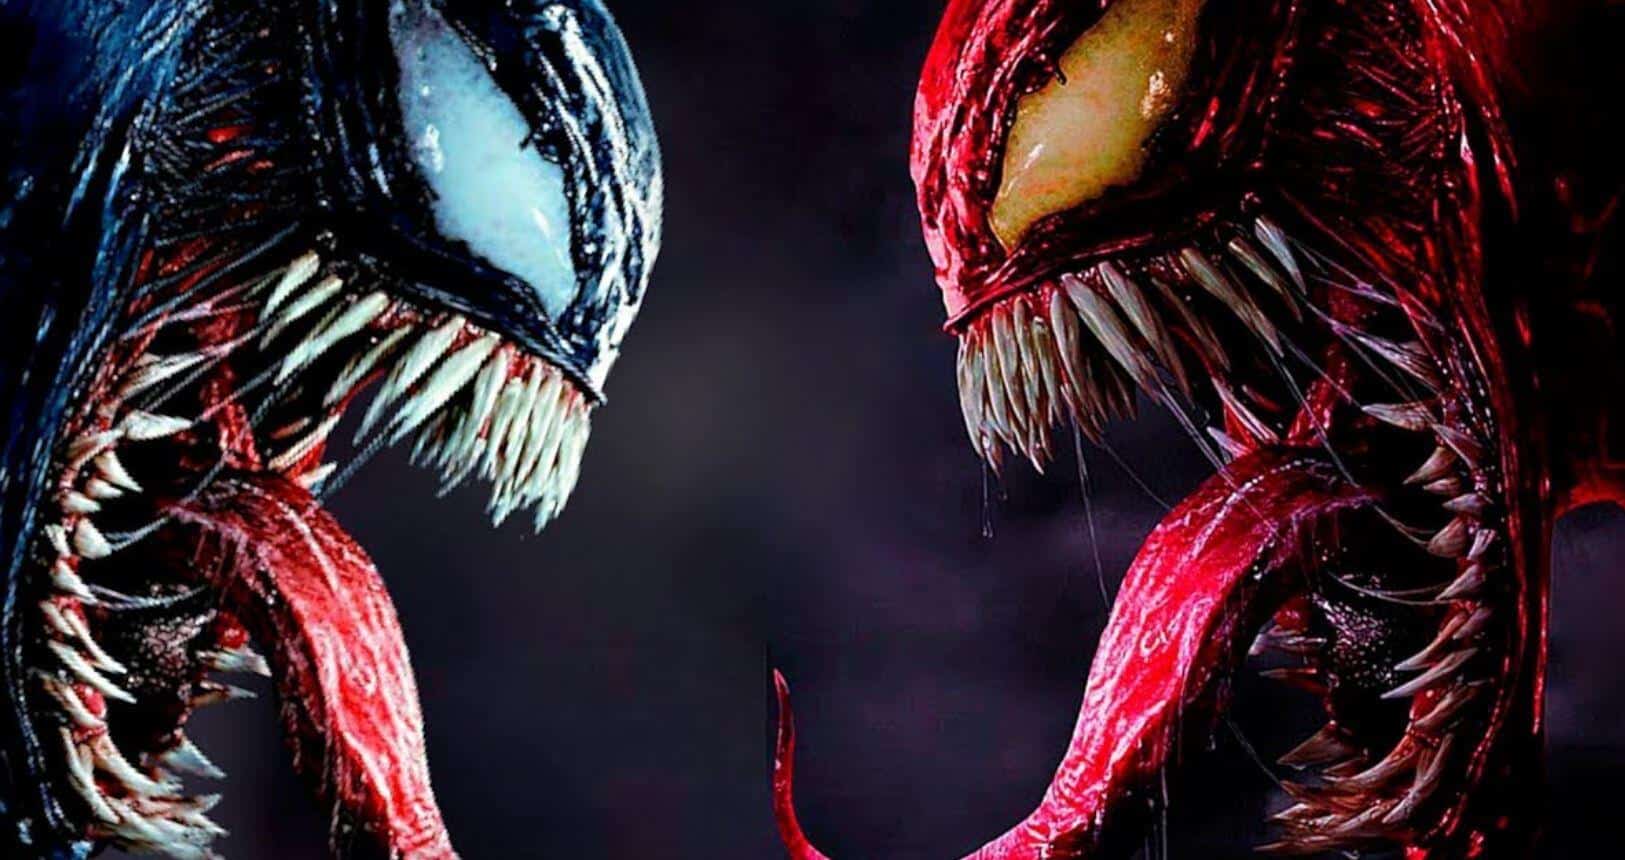 Venom 2' Trailer Has Apparently Leaked Online Ahead Of Upcoming